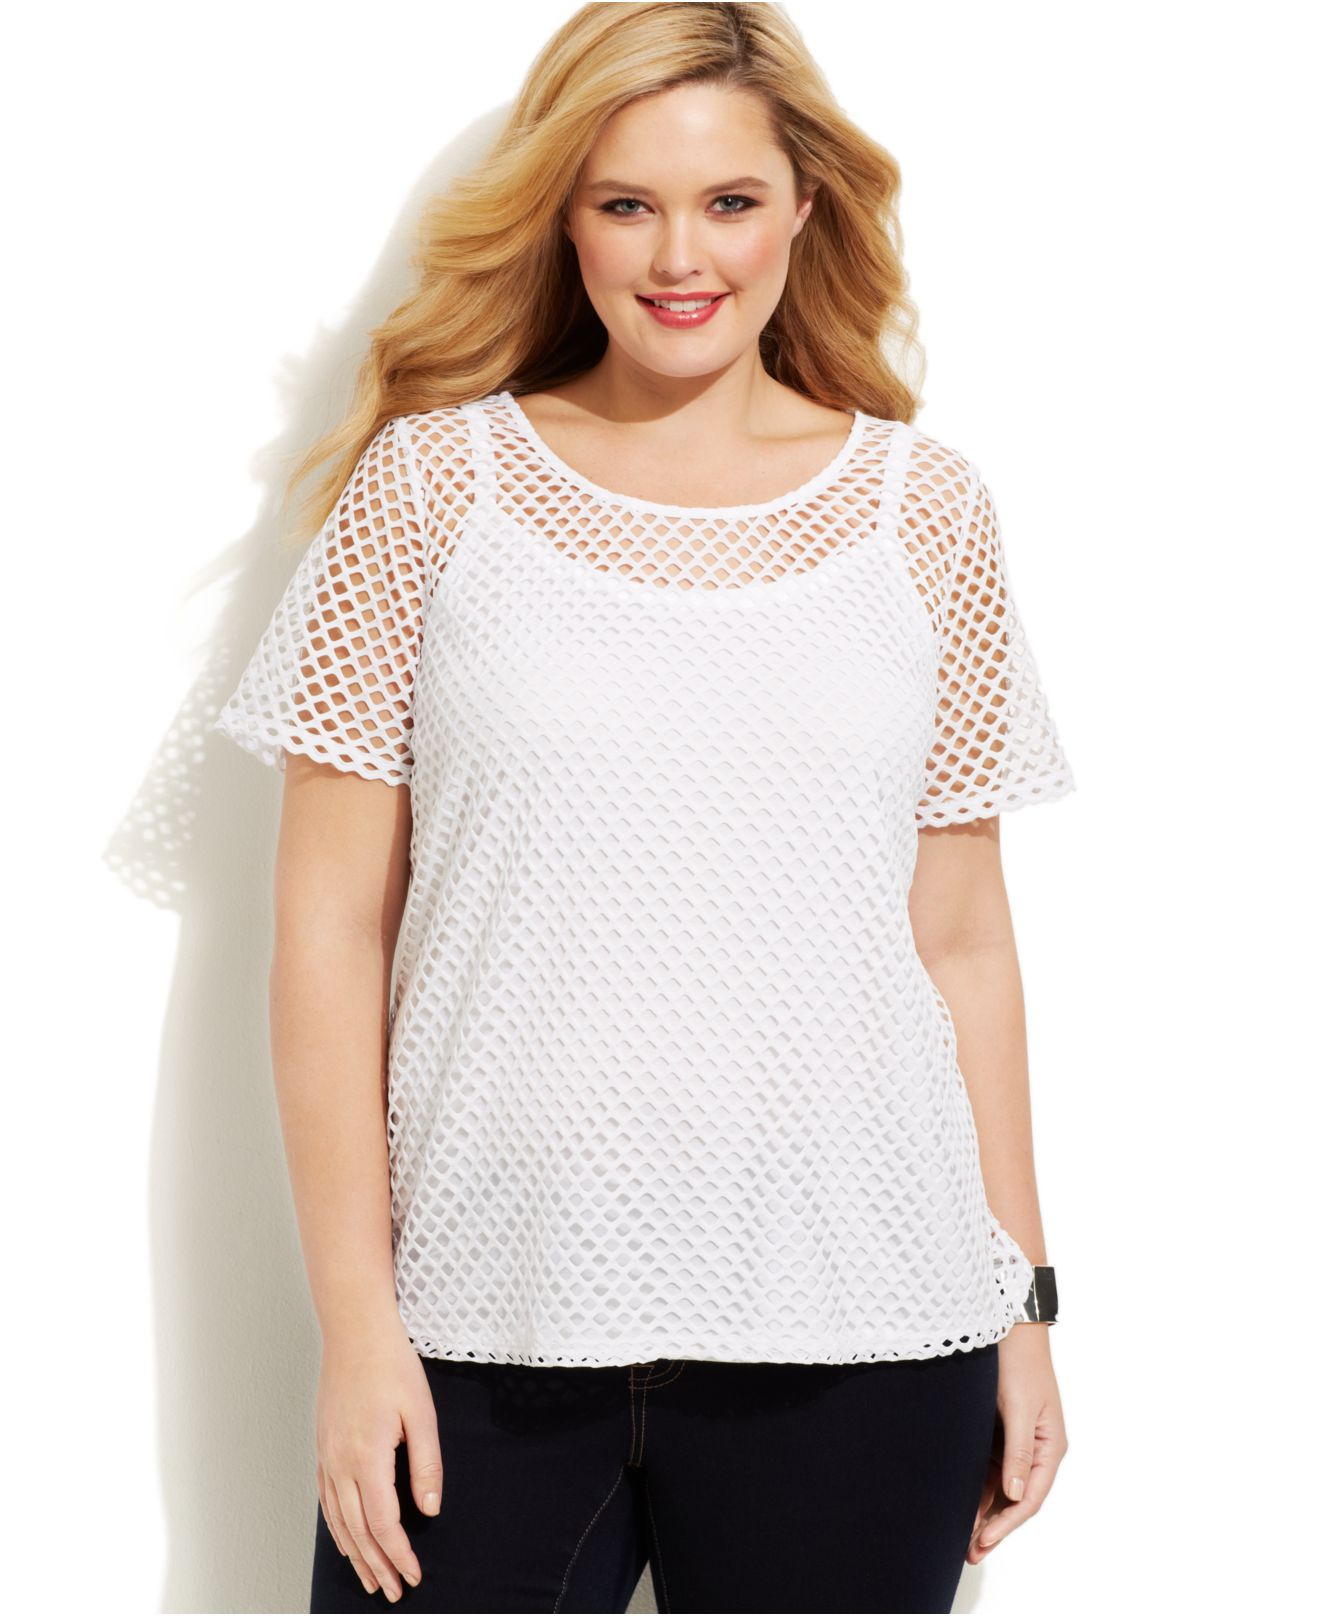 Inc international concepts Plus Size Short-Sleeve Mesh Top in White | Lyst